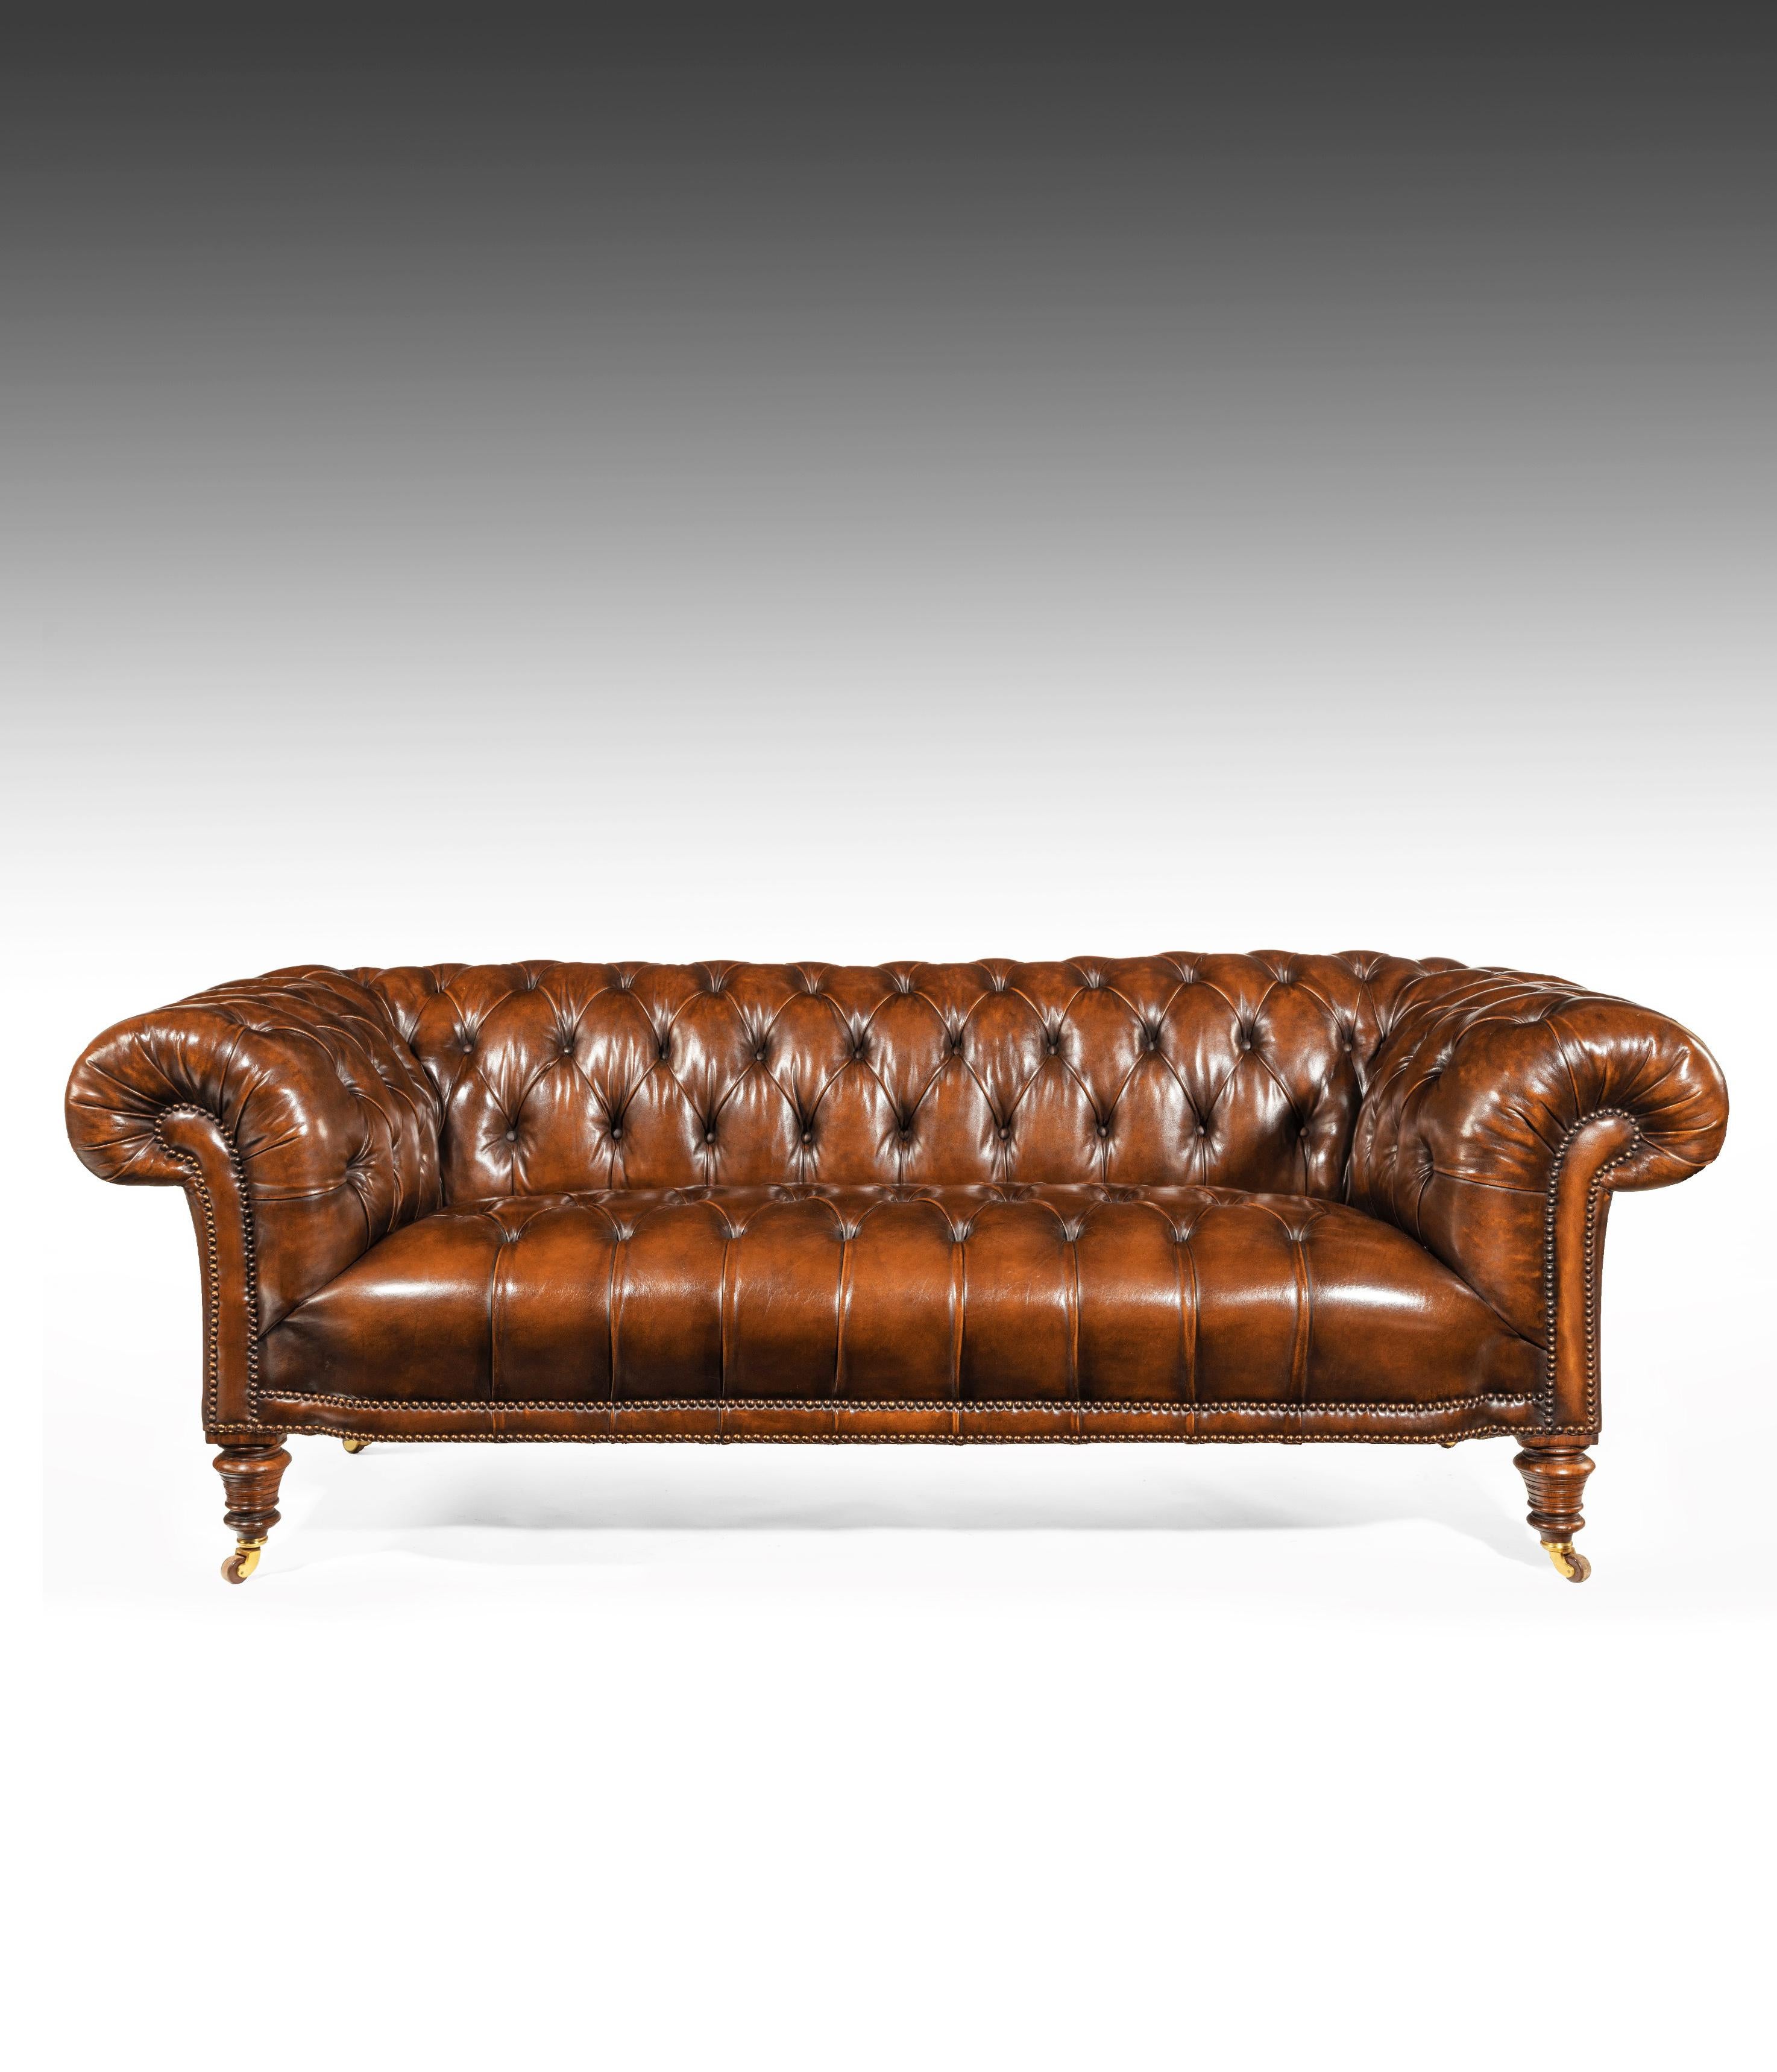 Victorian 19th Century Gillows Figured Walnut Leather Chesterfield Sofa